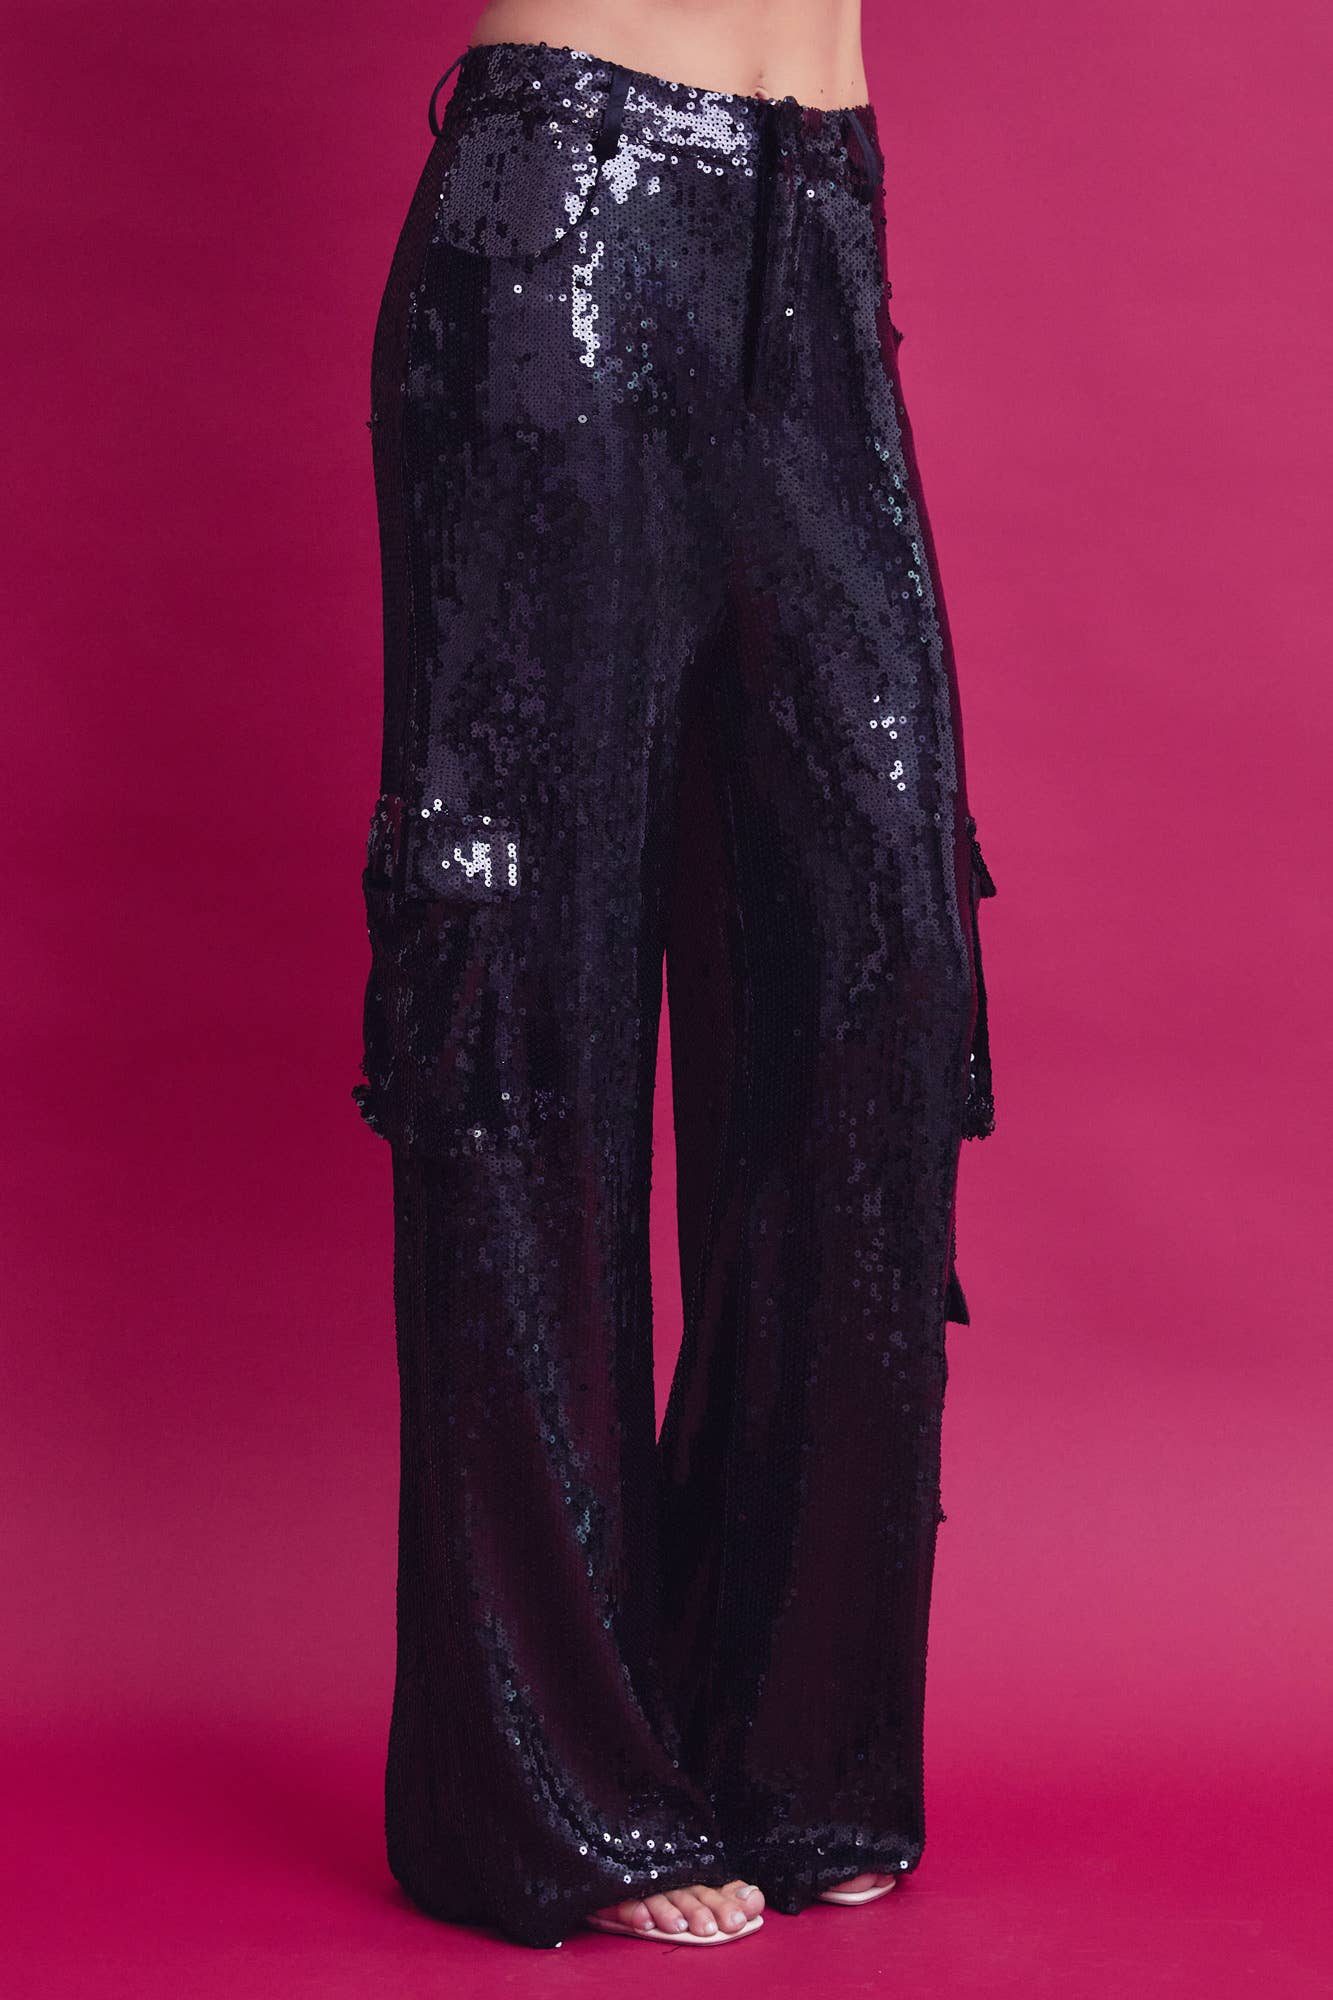 Sequin cargo pants with pockets